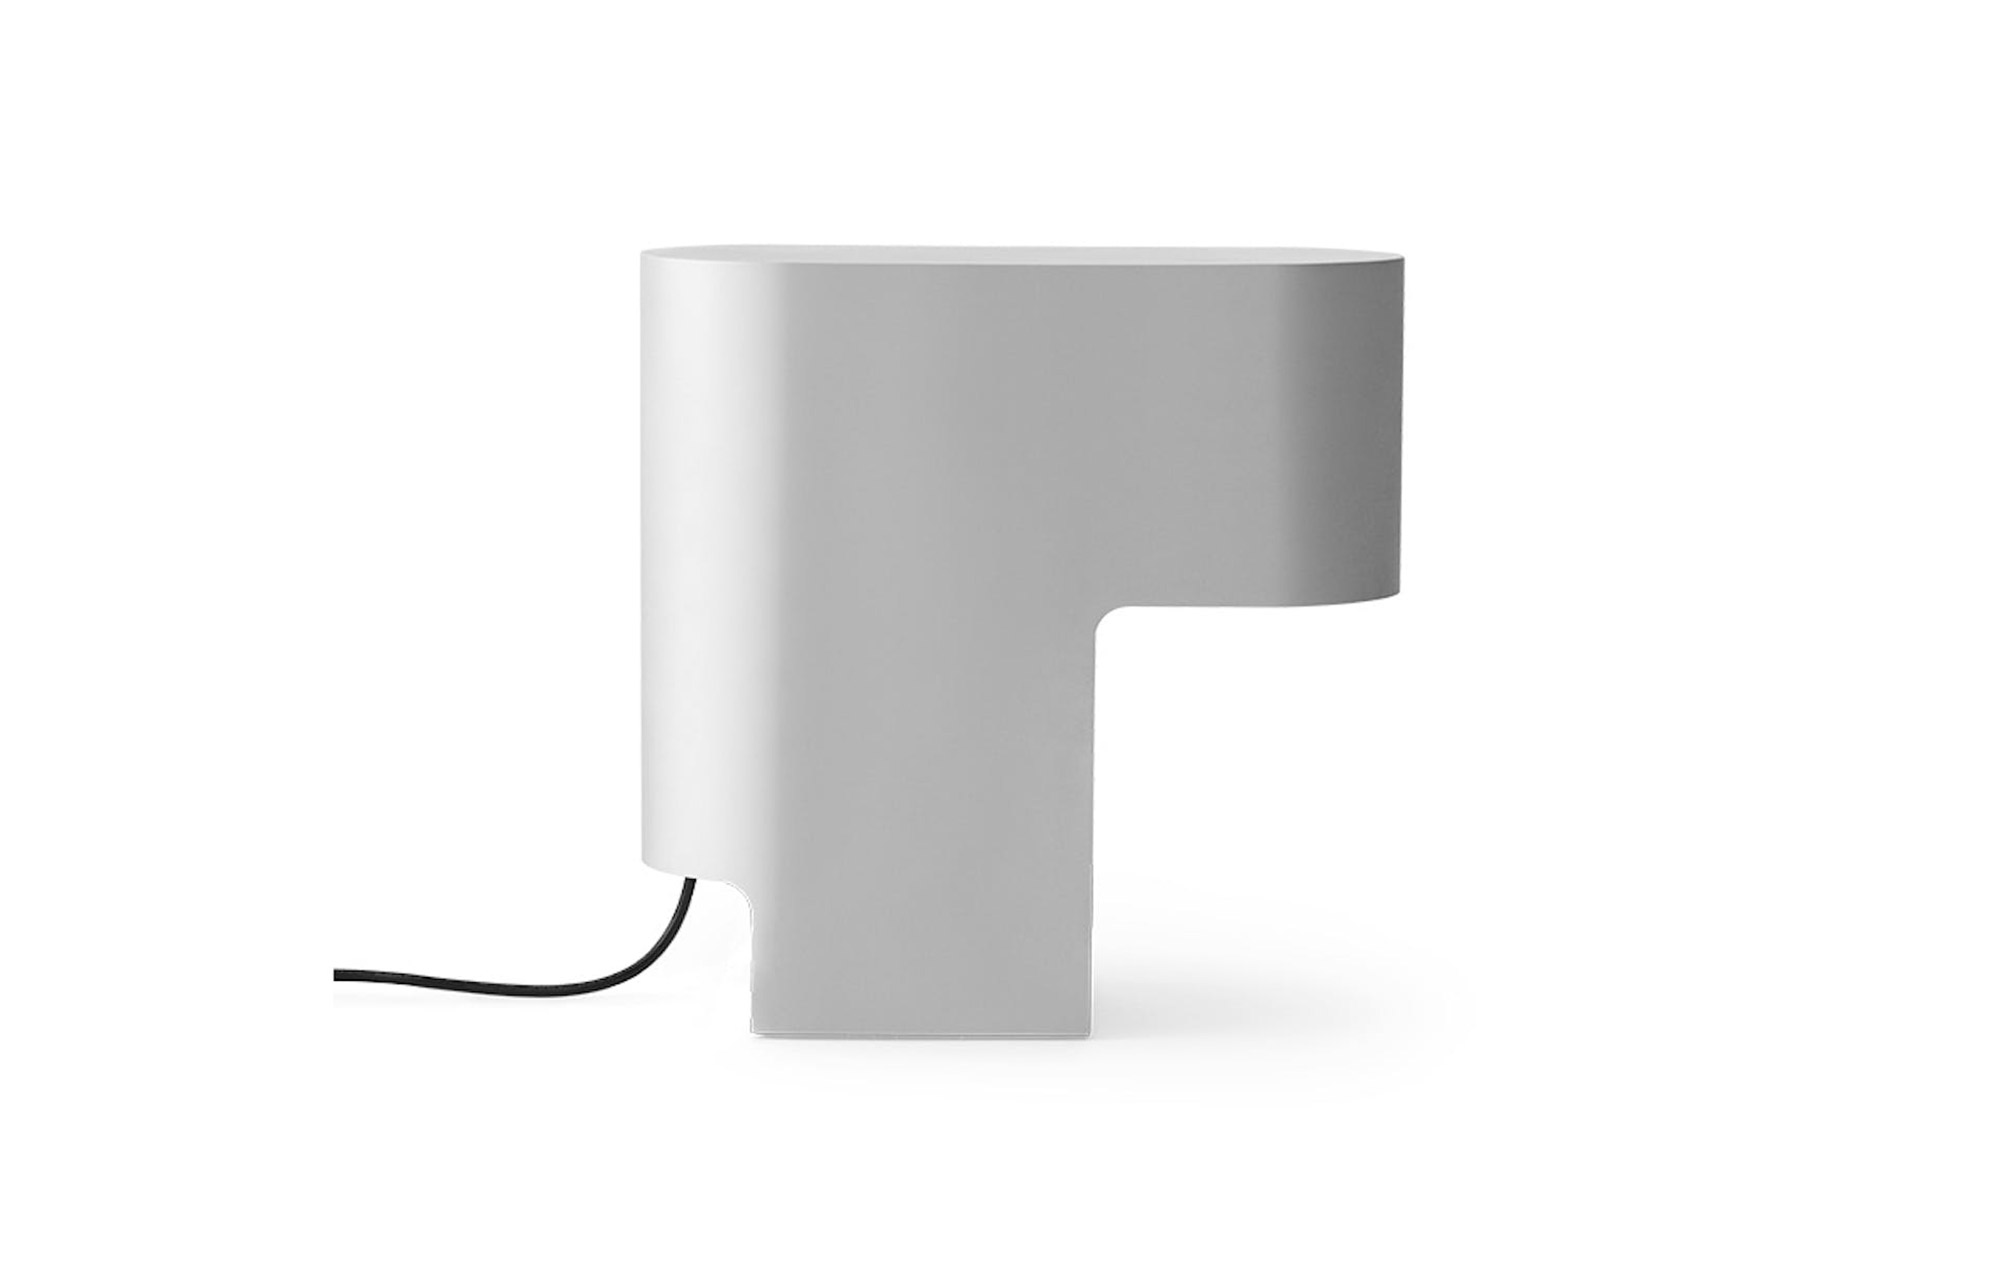 The W223 Table Lamp by John Pawson for Wästberg, aluminum side view